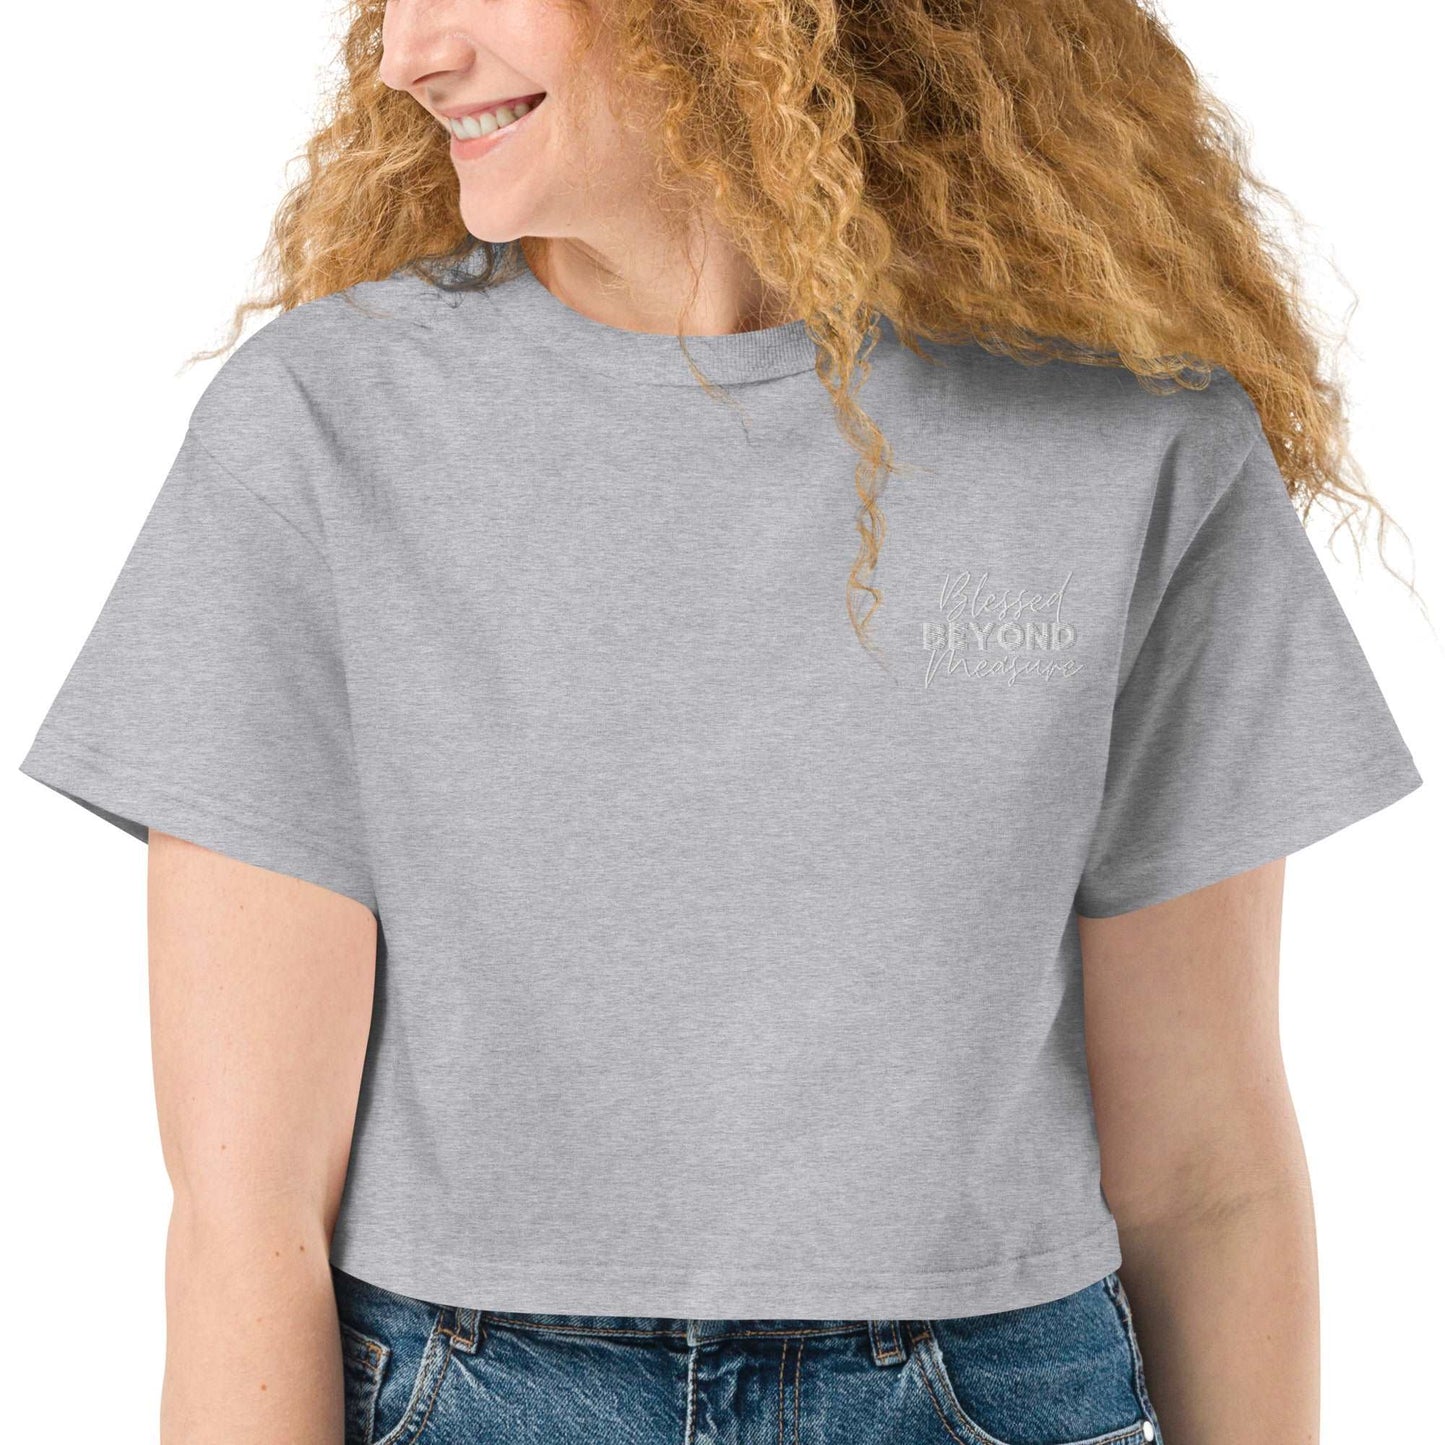 Blessed Beyond Measure - Champion crop top